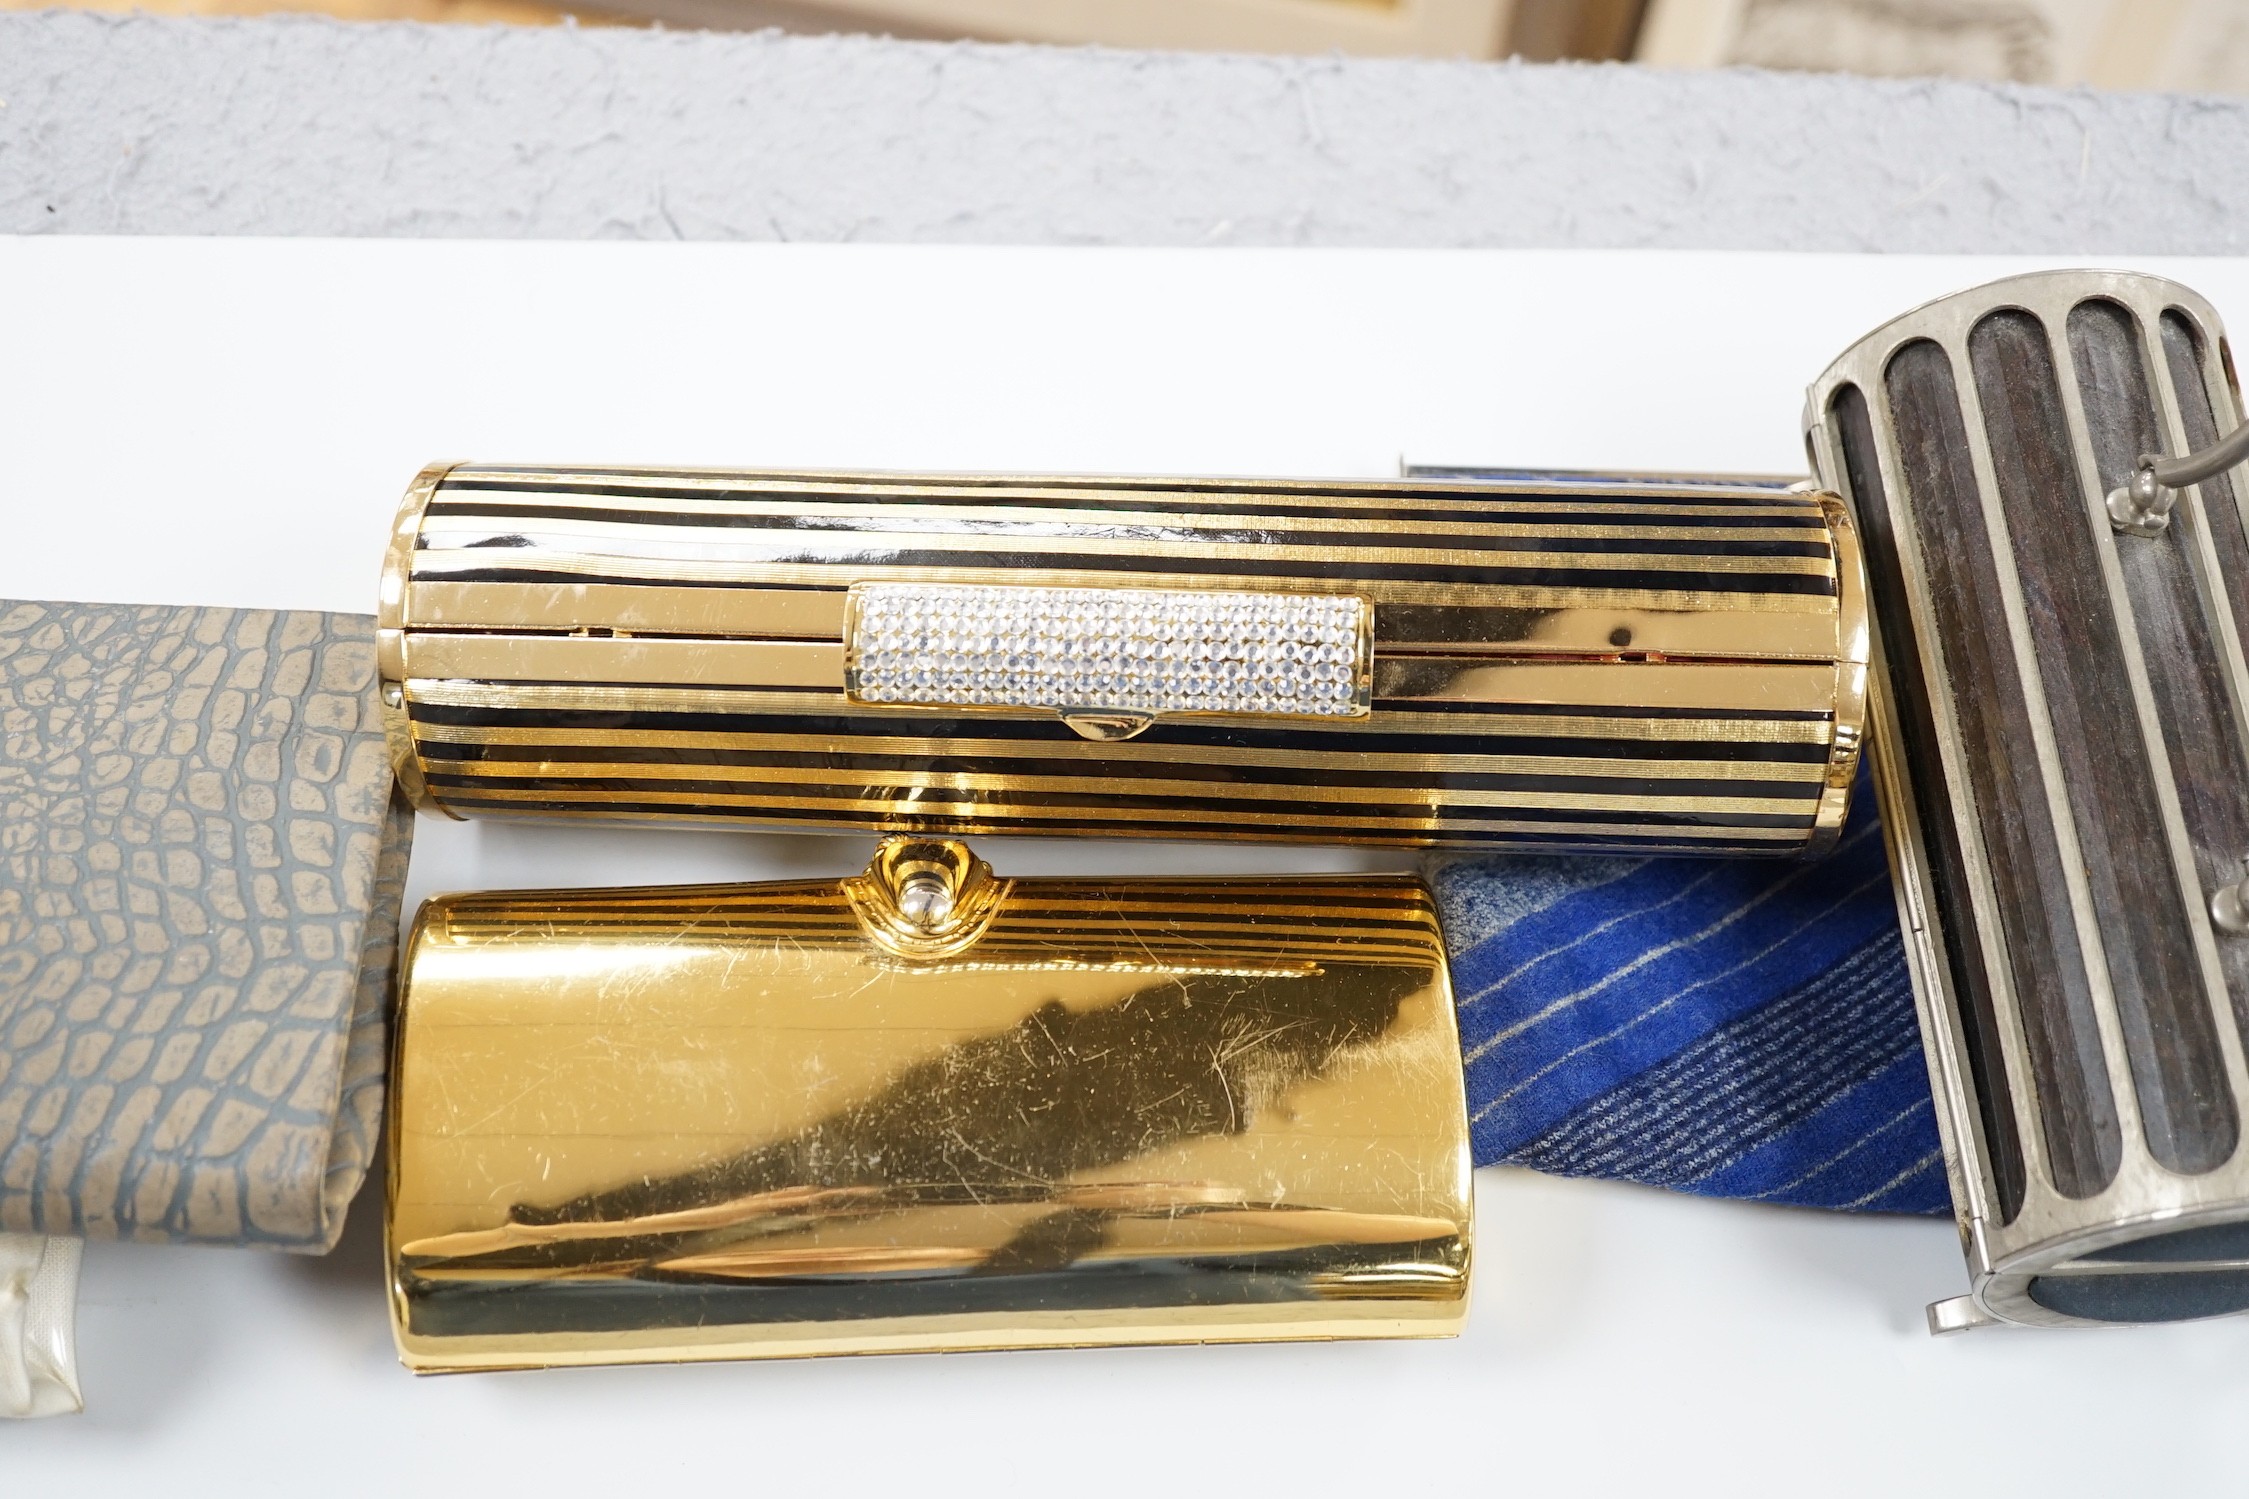 Two 1960's gilt metal ladies evening bags, a metal and wooden bag, a 1950's plastic and fabric bag possibly American, a 1930's faux crocodile clutch bag and a 1930's stripe clutch bag